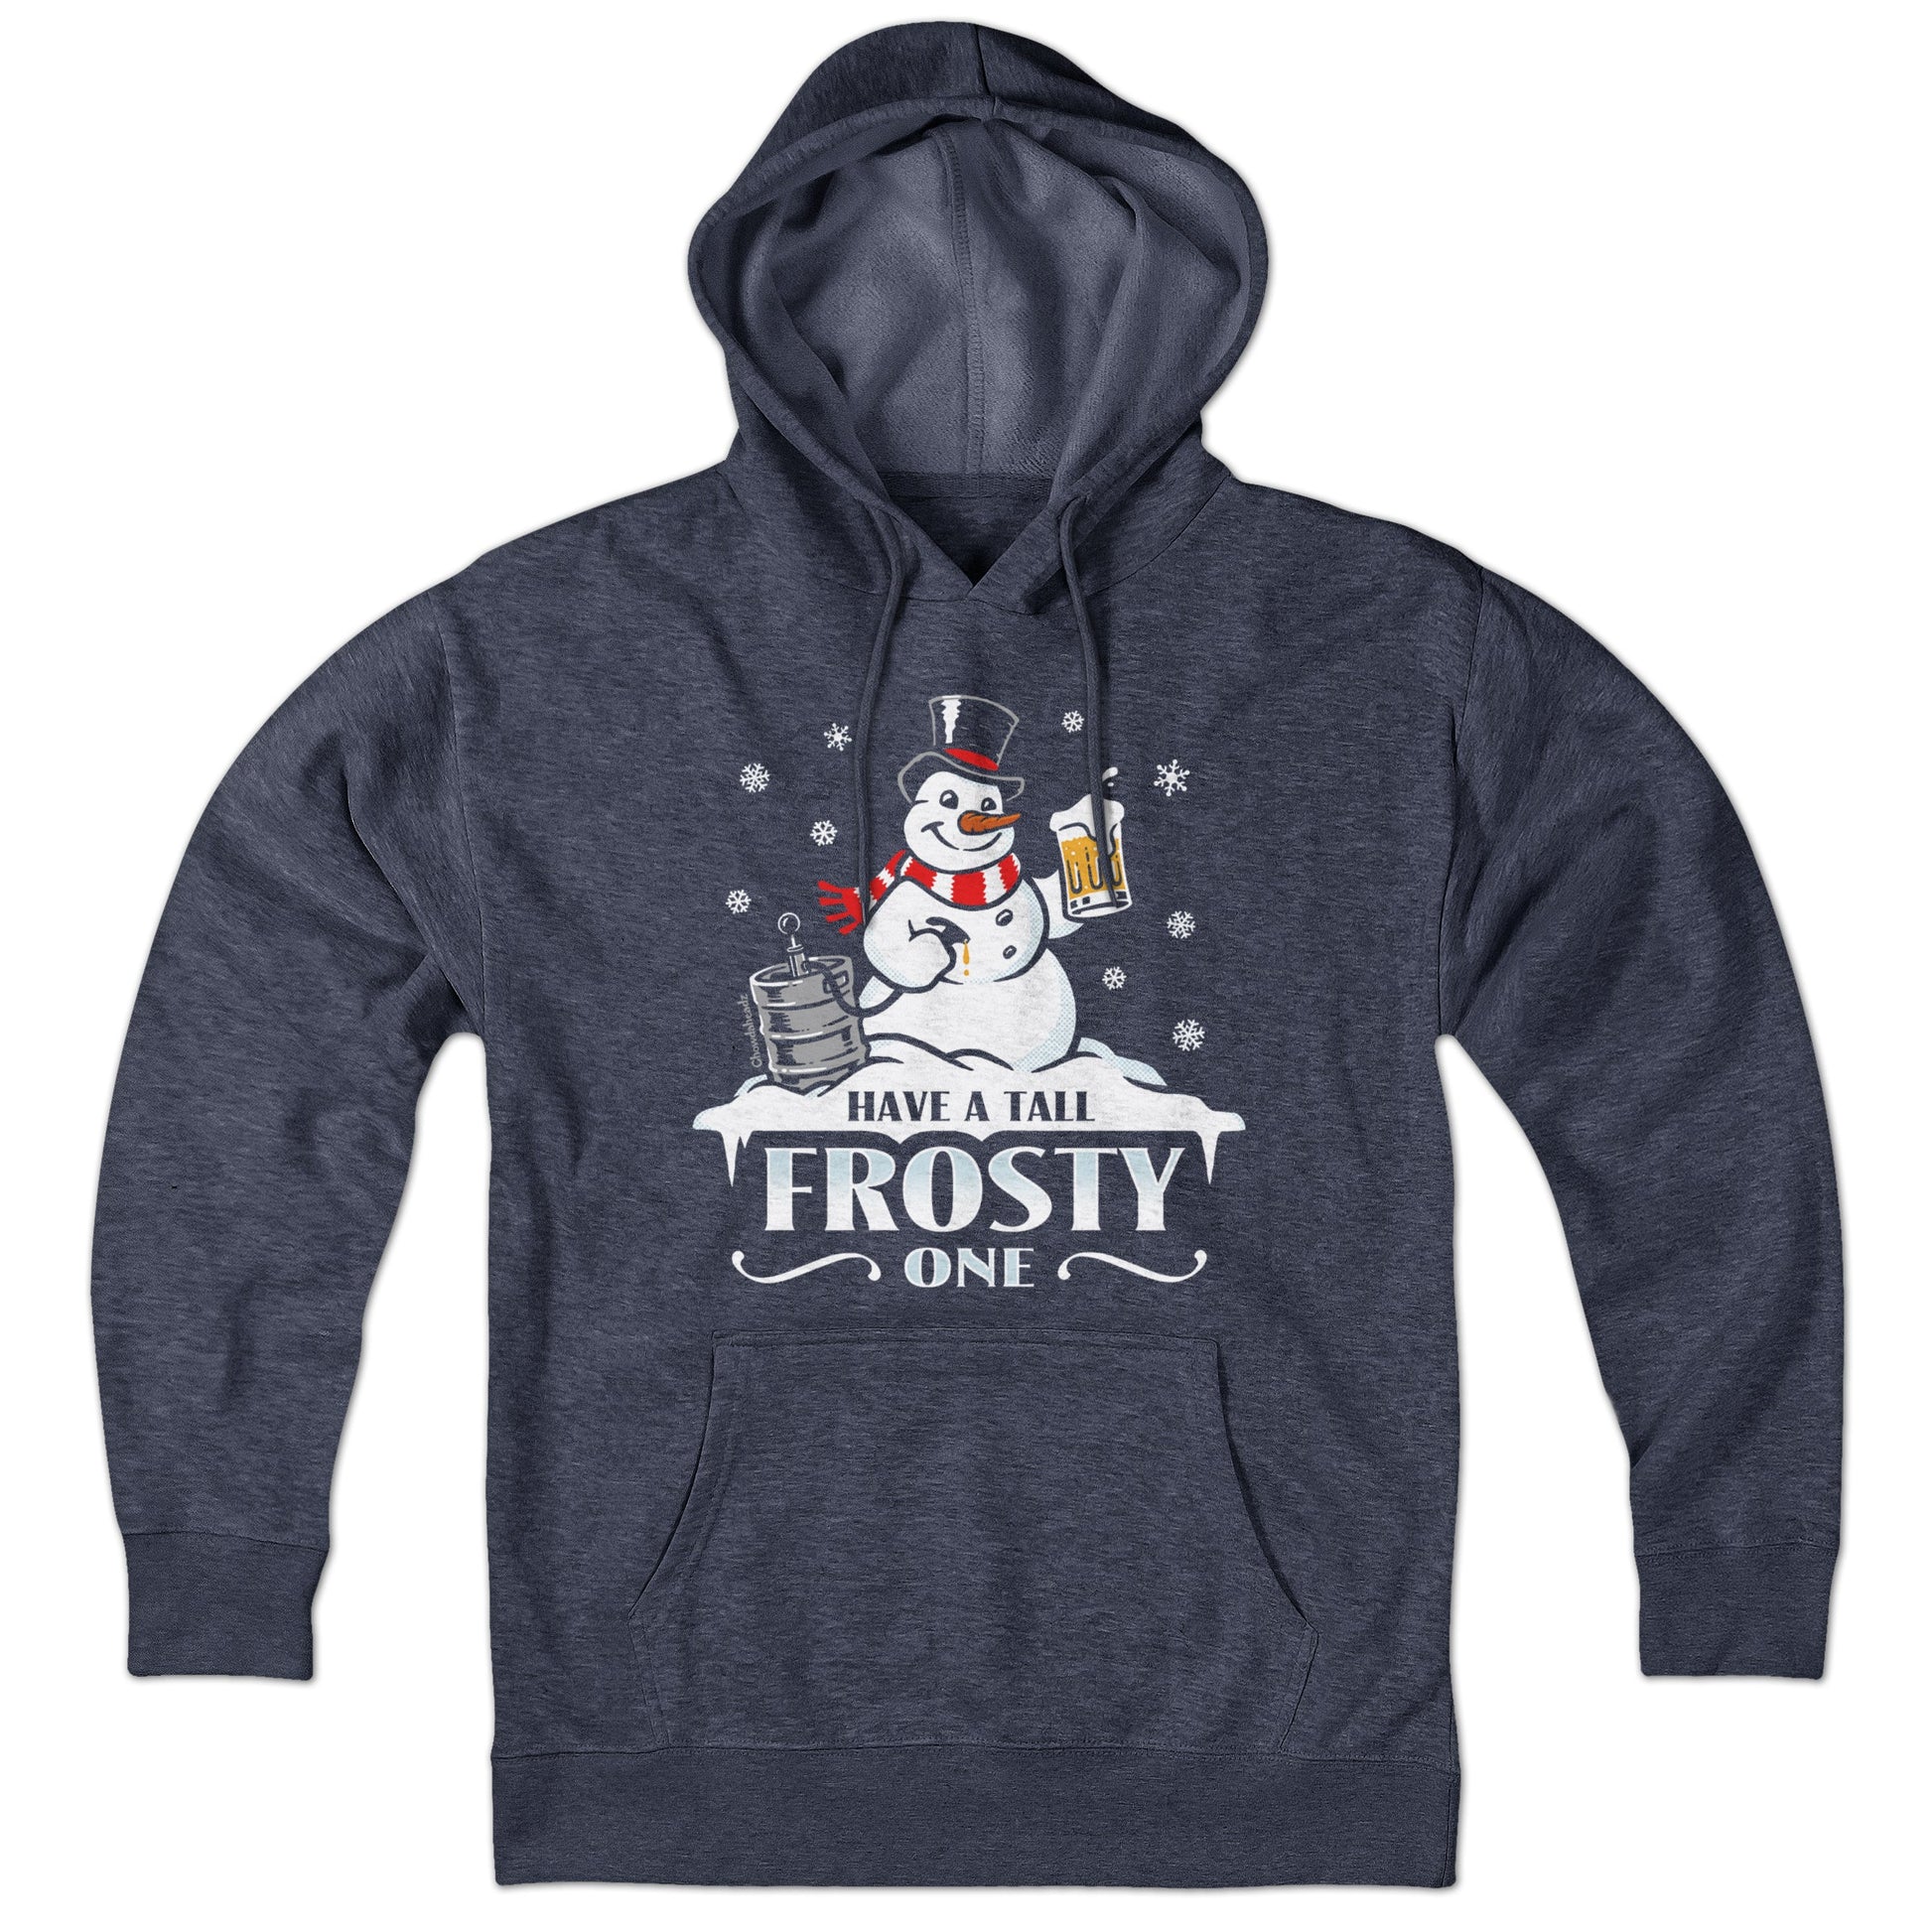 Have A Tall Frosty One Hoodie - Chowdaheadz